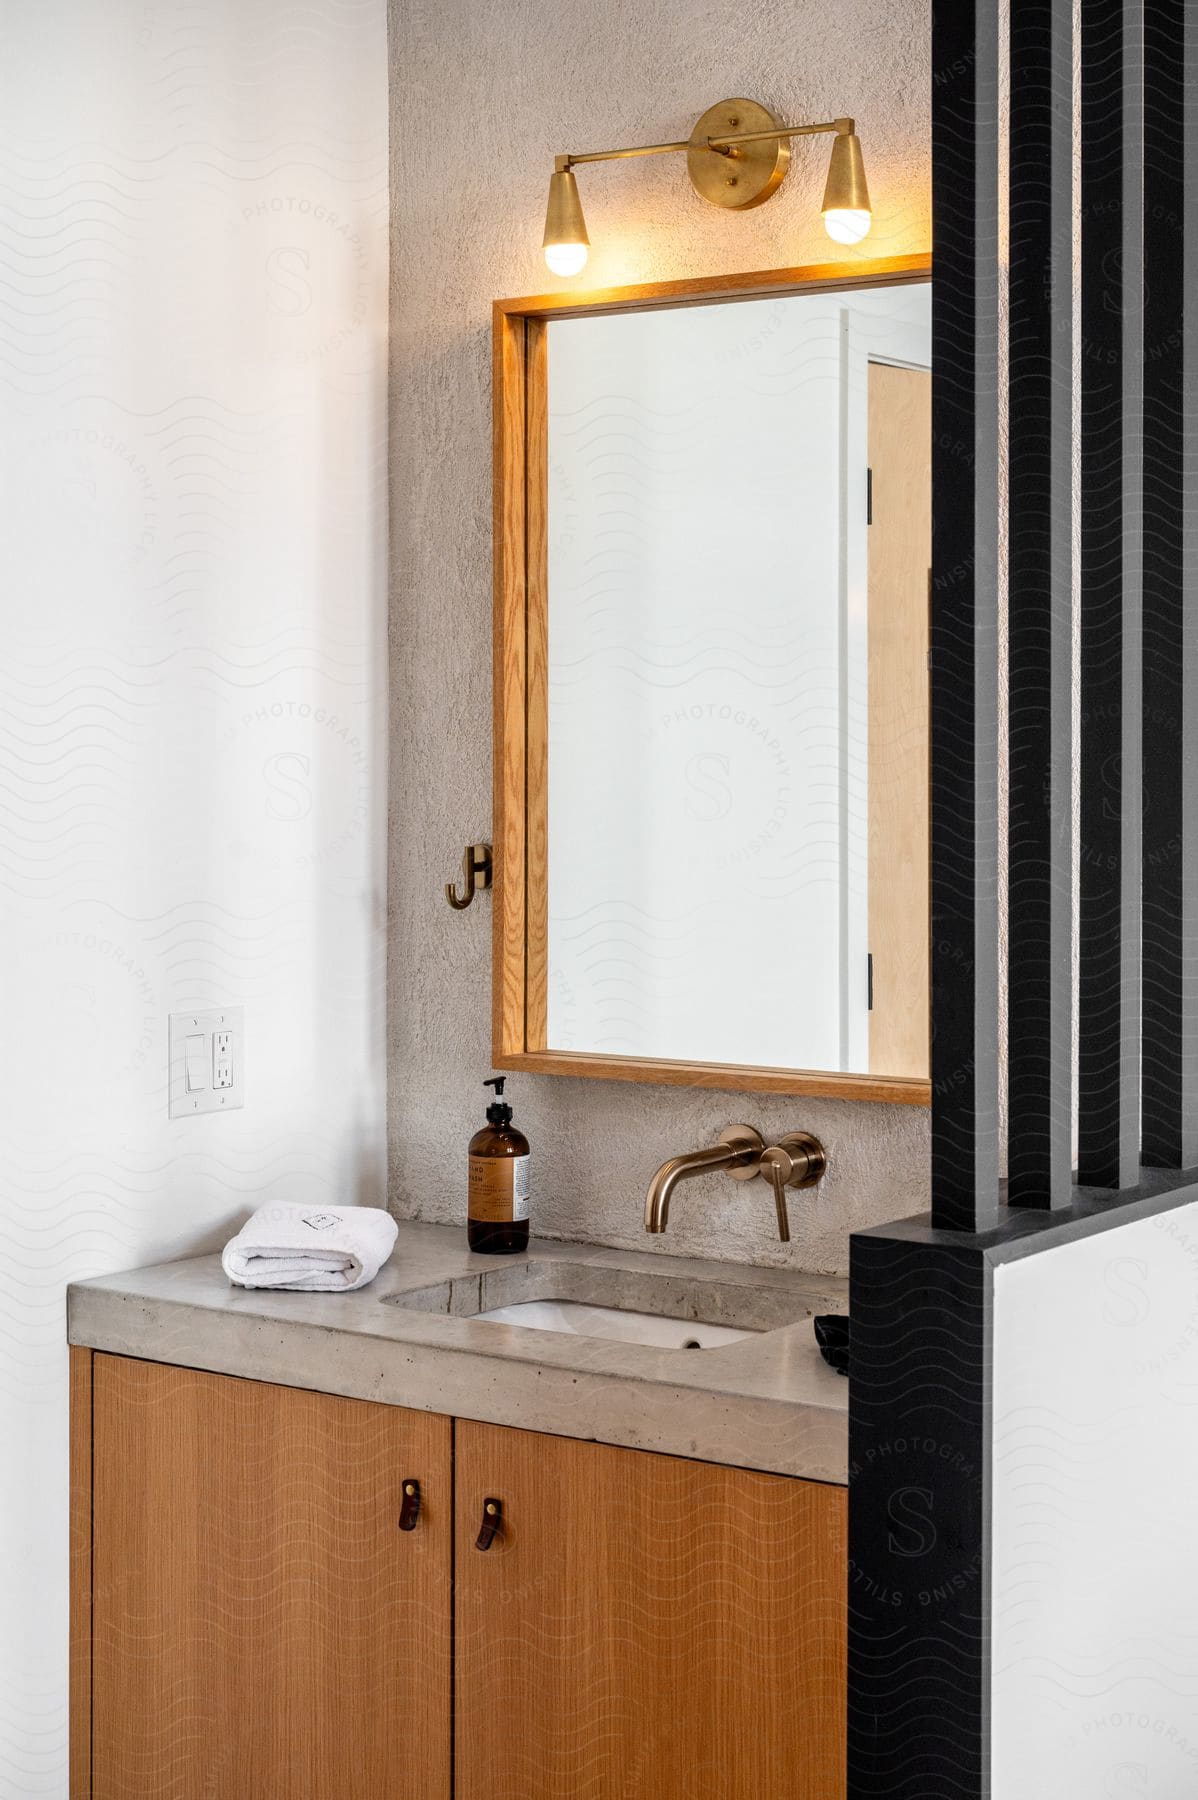 A modern bathroom sink area with a large mirror, illuminated by wall lights. The concrete worktop and wooden cabinet complete the look.